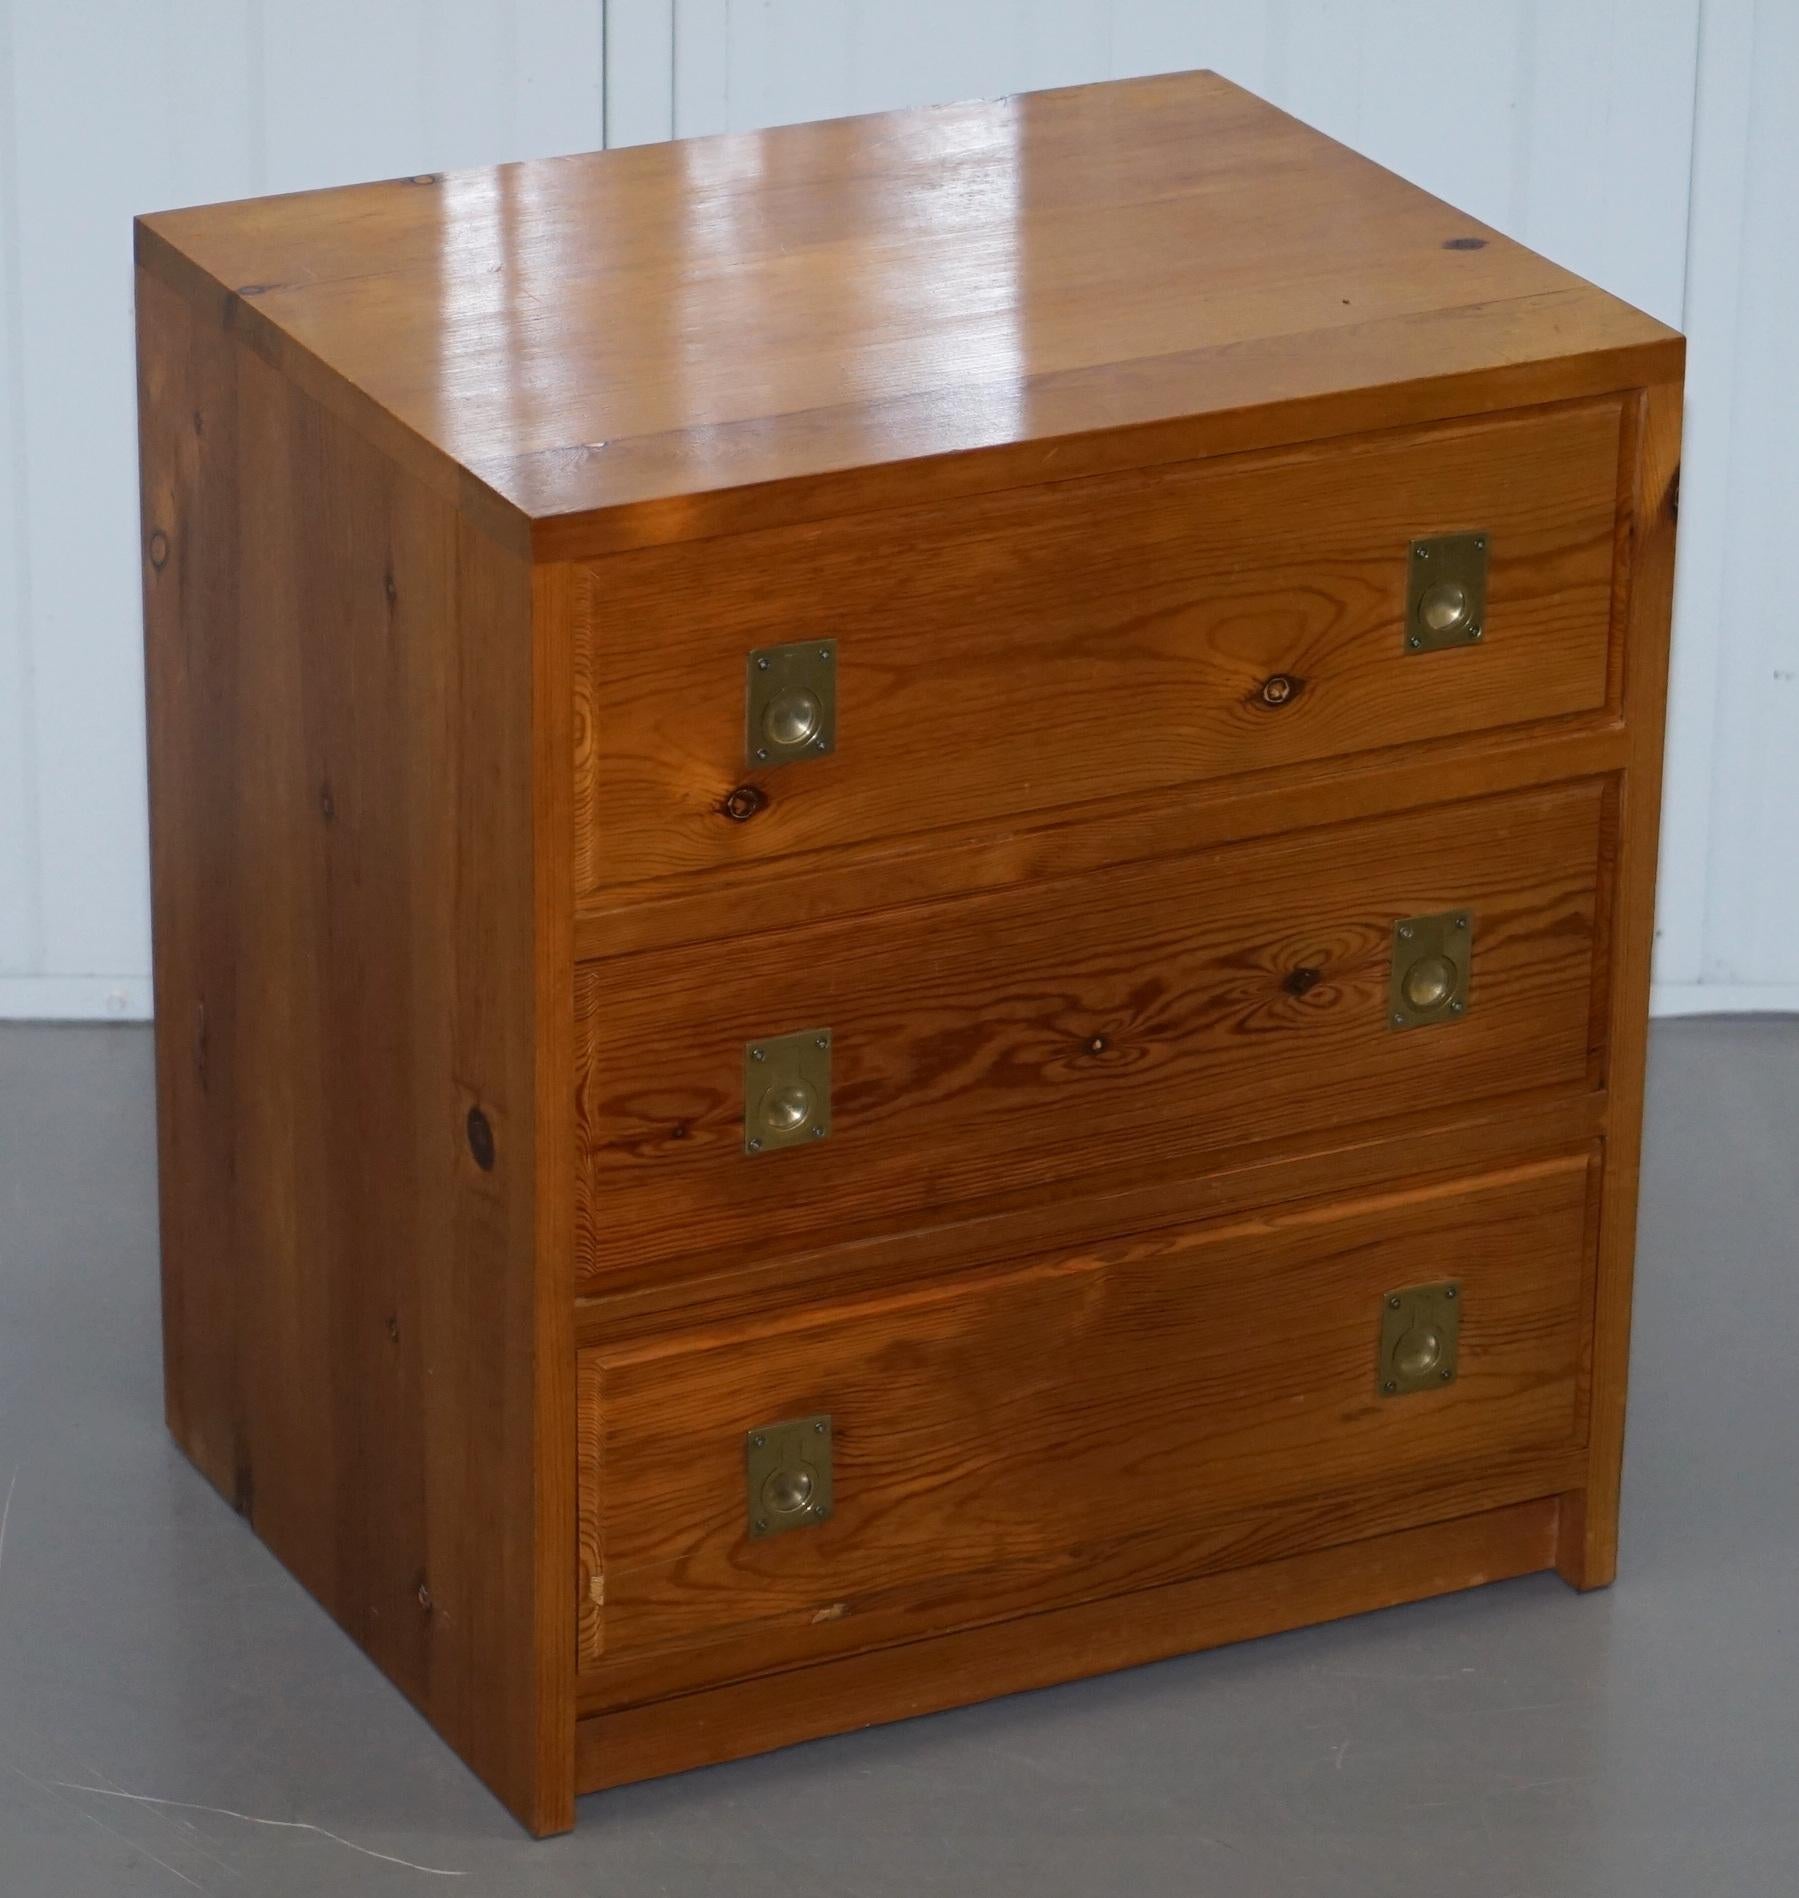 We are delighted to offer for sale this stunning pair of Nodus solid pine campaign bedside table sized chests of drawers

A good looking pair with a lovely burr pine timber and solid brass fittings, the pictures don’t come close to doing this pair